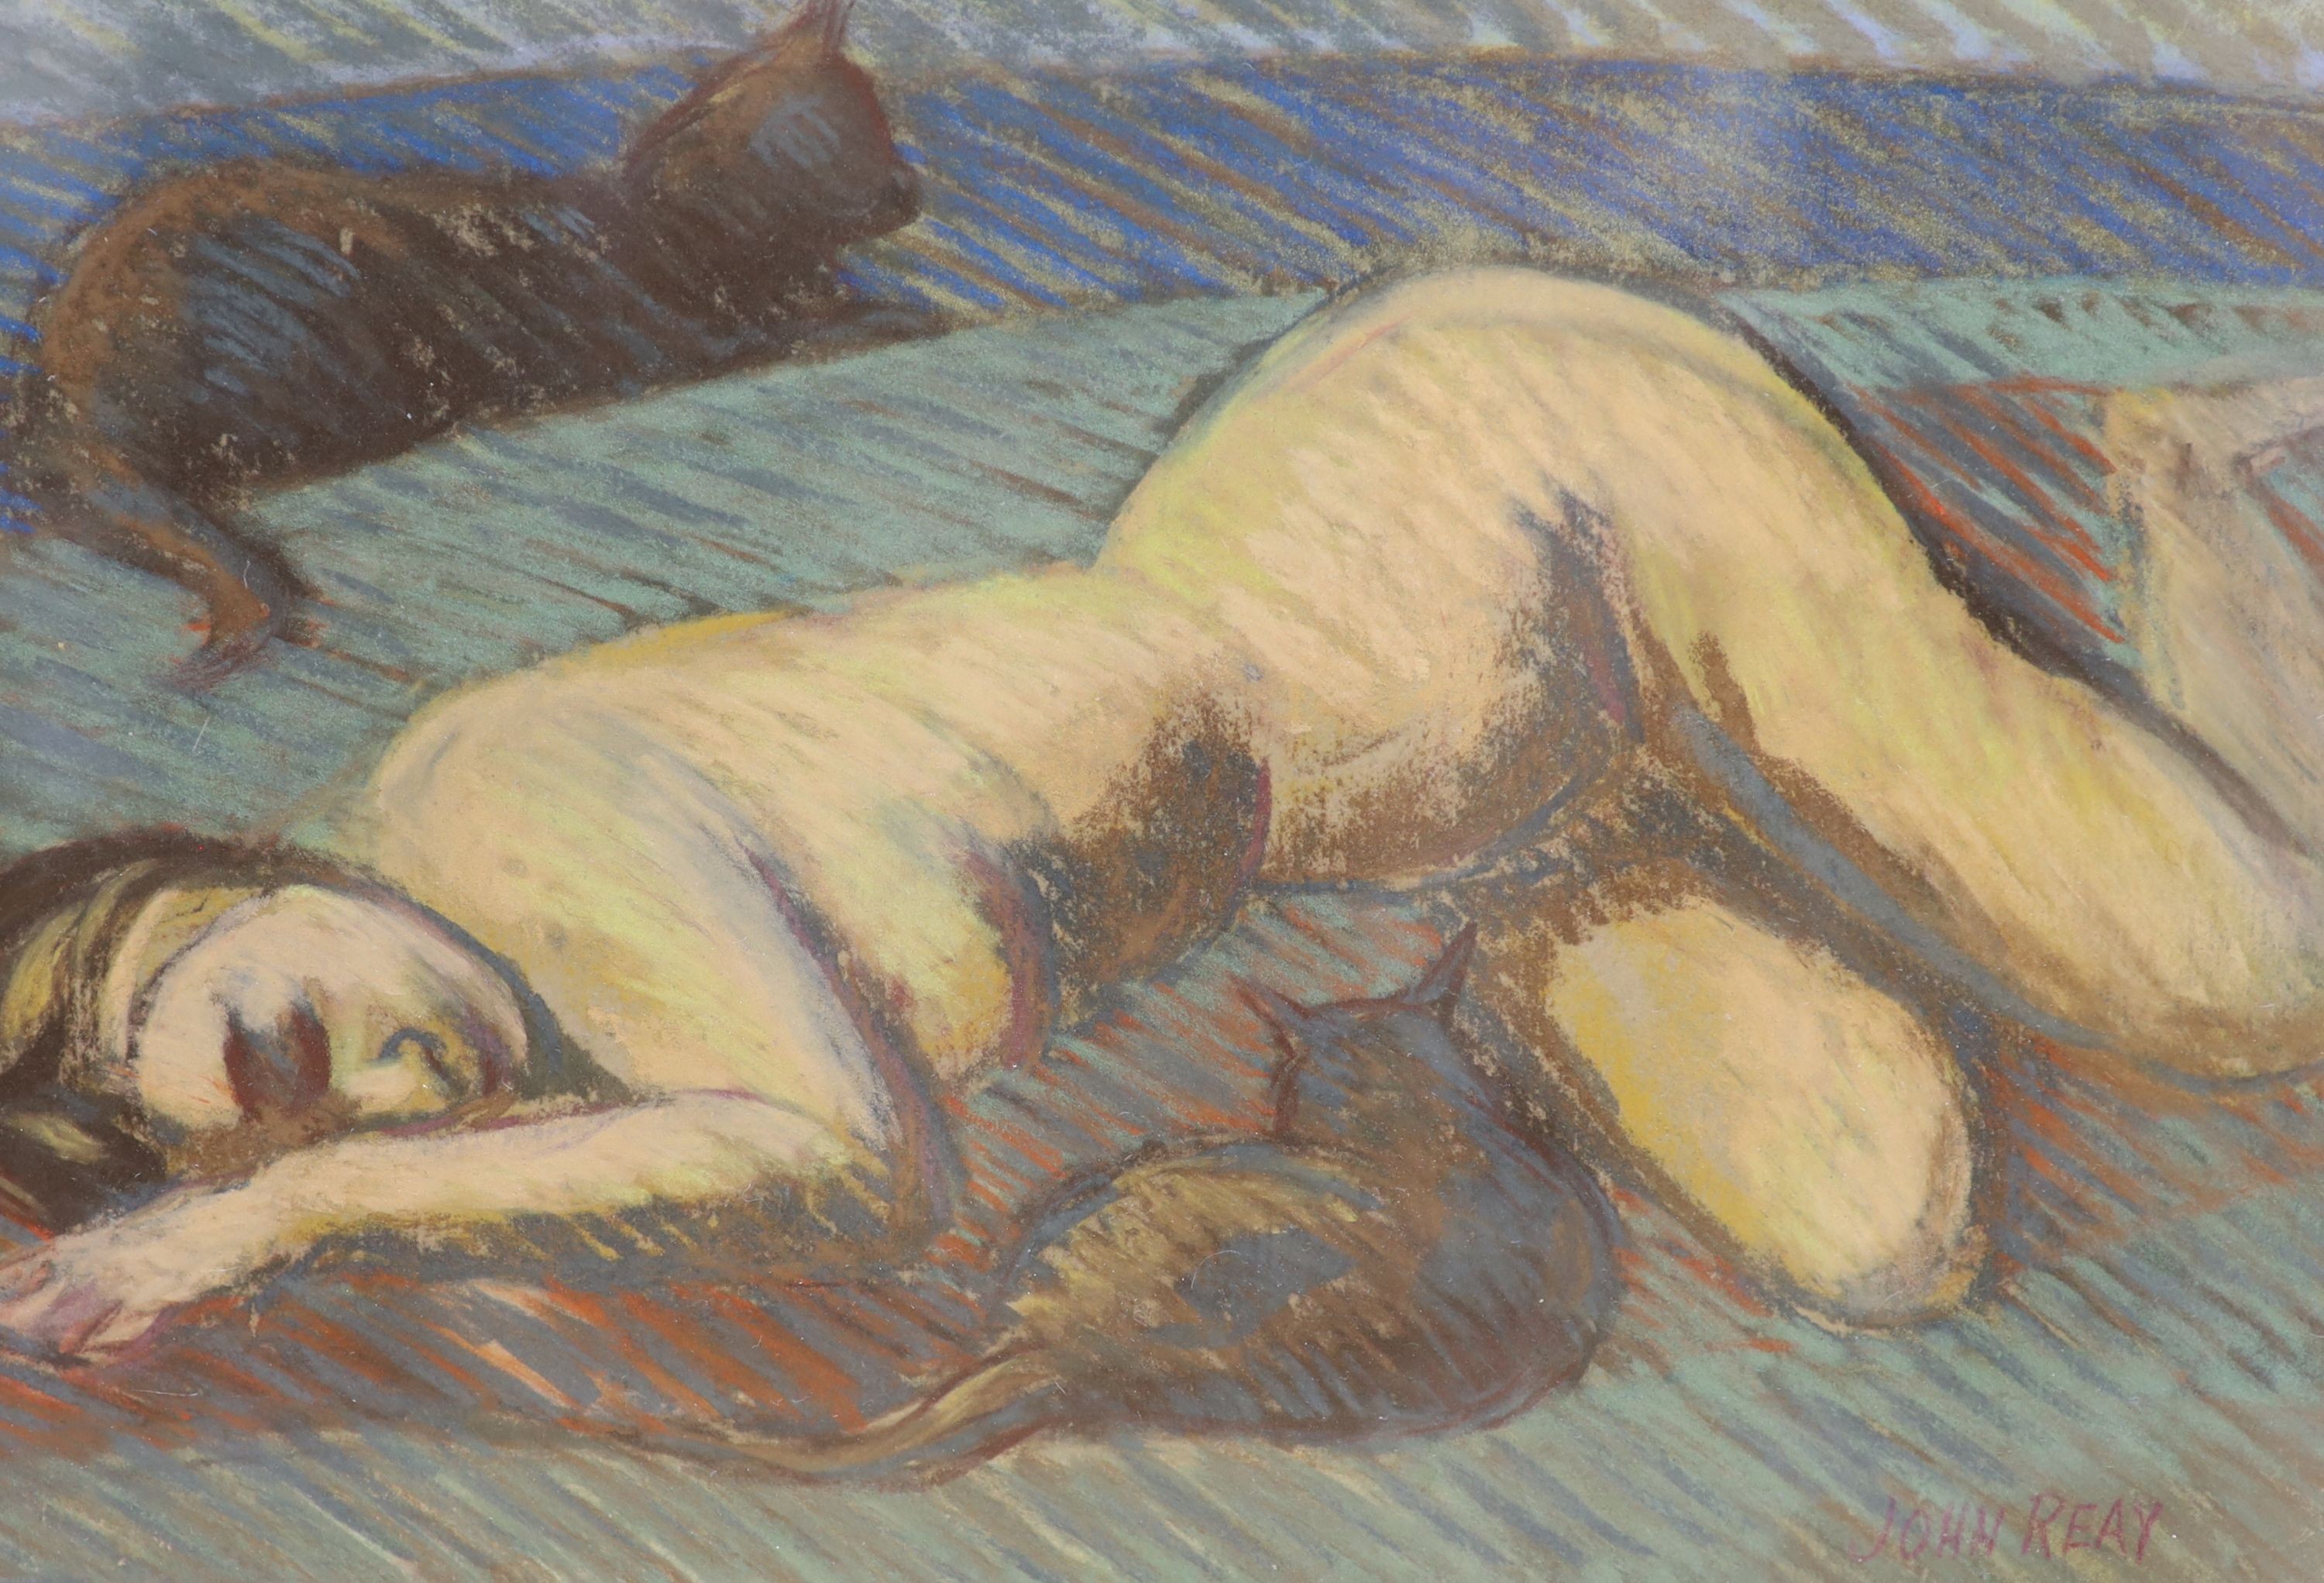 John Reay (1947-2011), pastel, reclining nude , 19 x 27cm. and James Gorman (1931-2005), watercolour, nude with cat, 20 x 18cm.